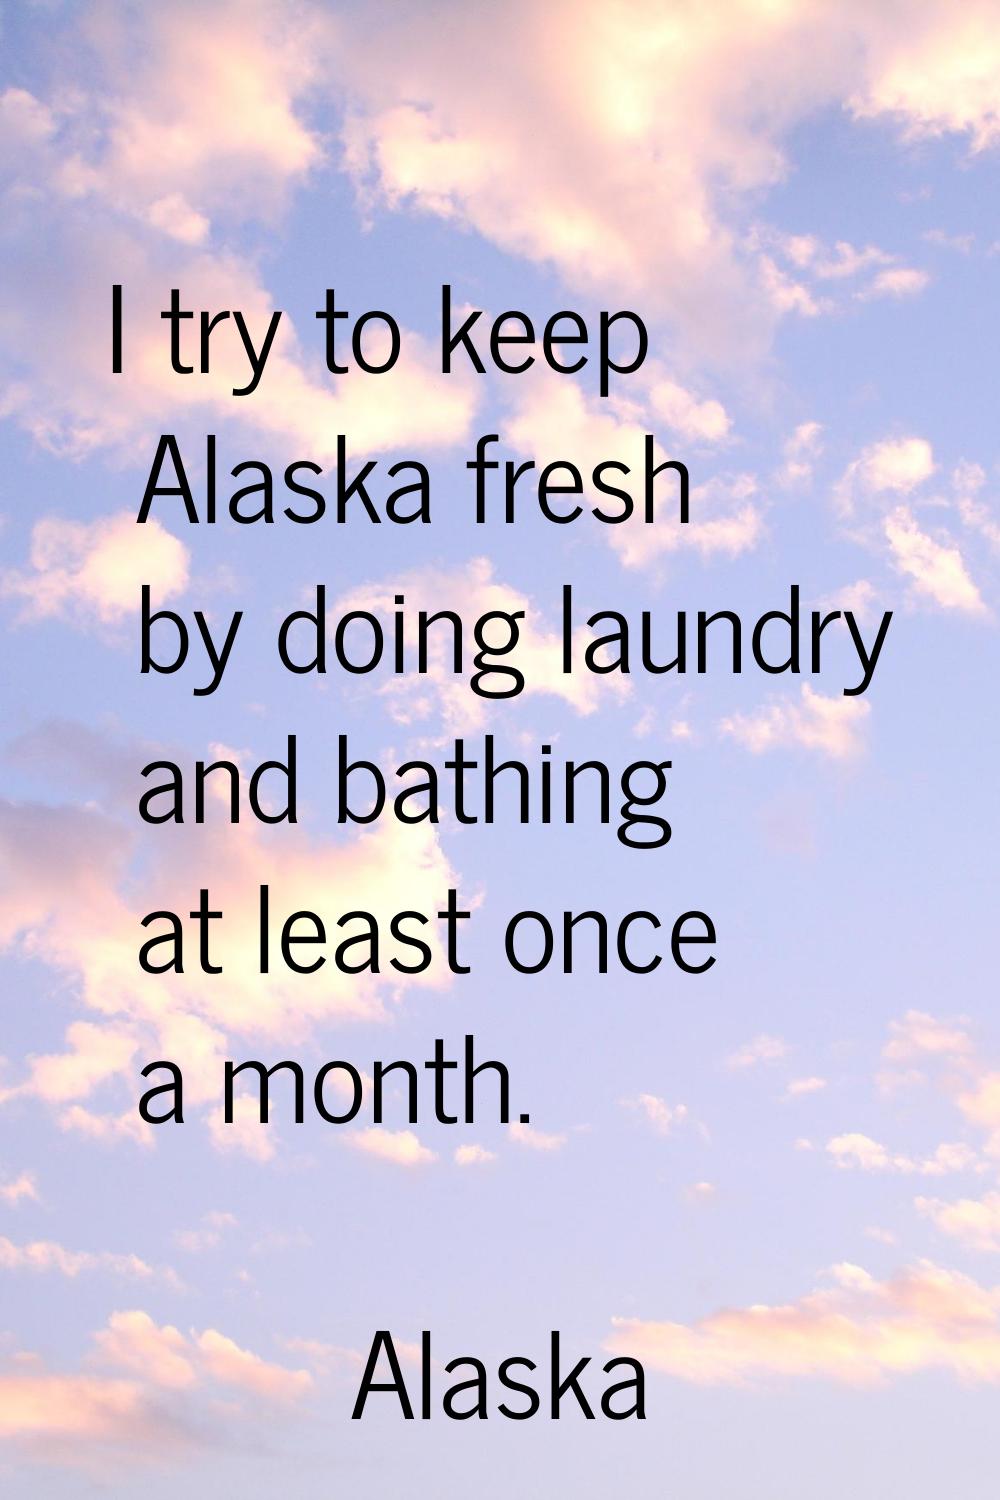 I try to keep Alaska fresh by doing laundry and bathing at least once a month.